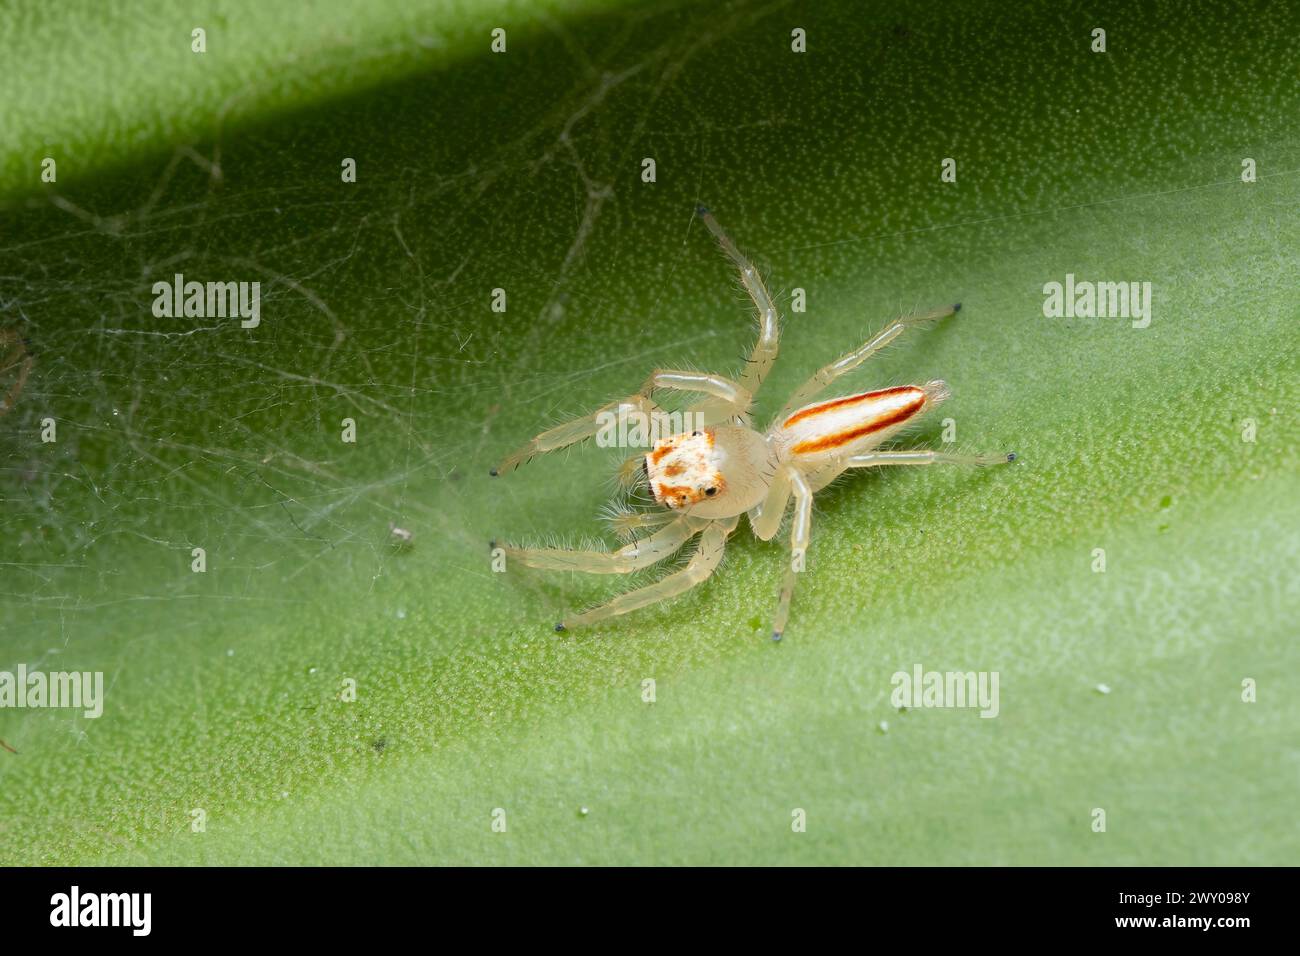 Female Tealonia dimidiata jumping spider positioned on a leaf, showcasing its dorsal patterns. Stock Photo